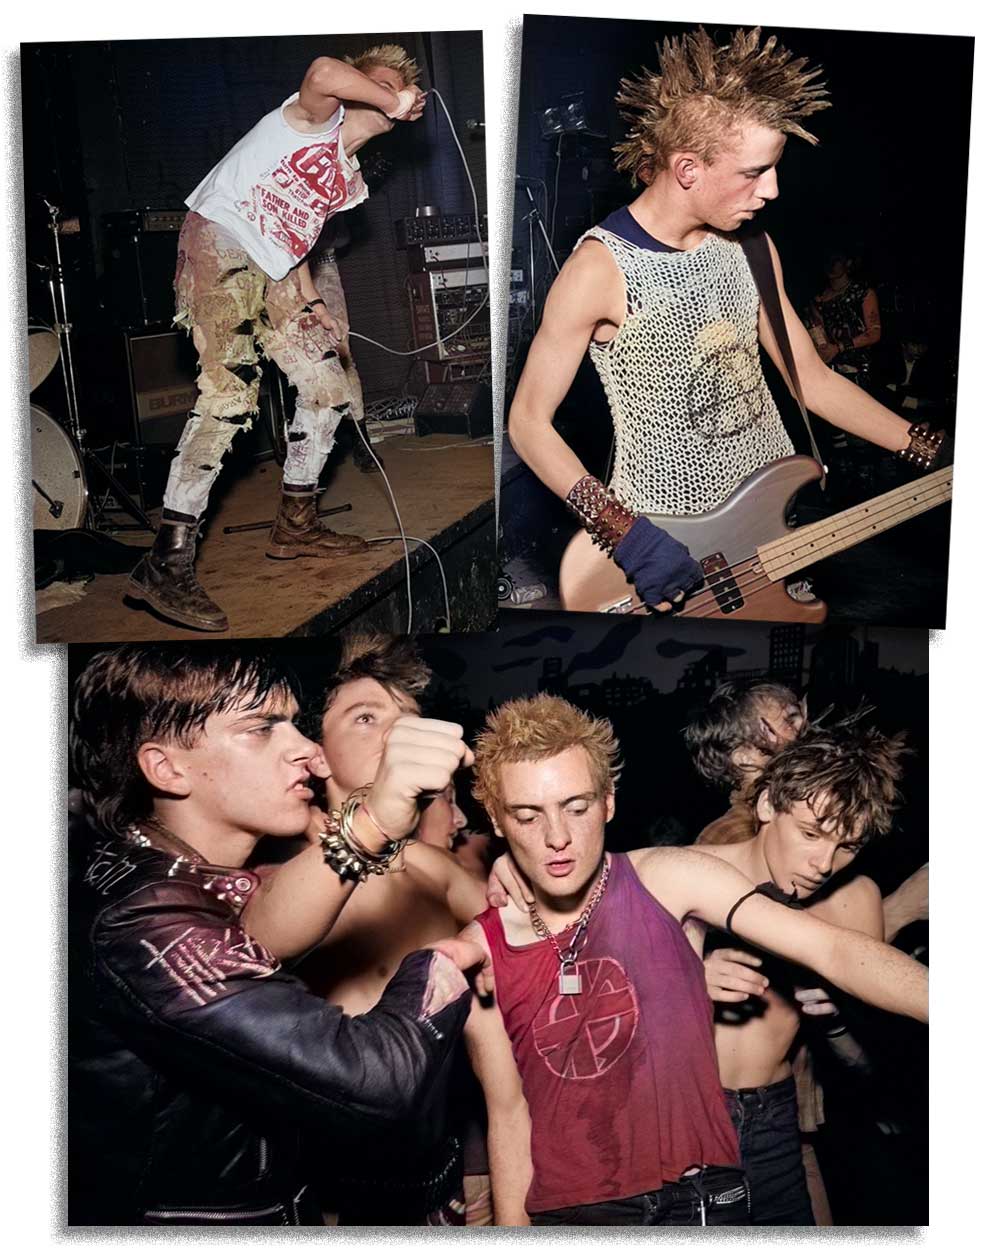 Working class 80s Anarcho-Punk captured by photographer, Chris Killip